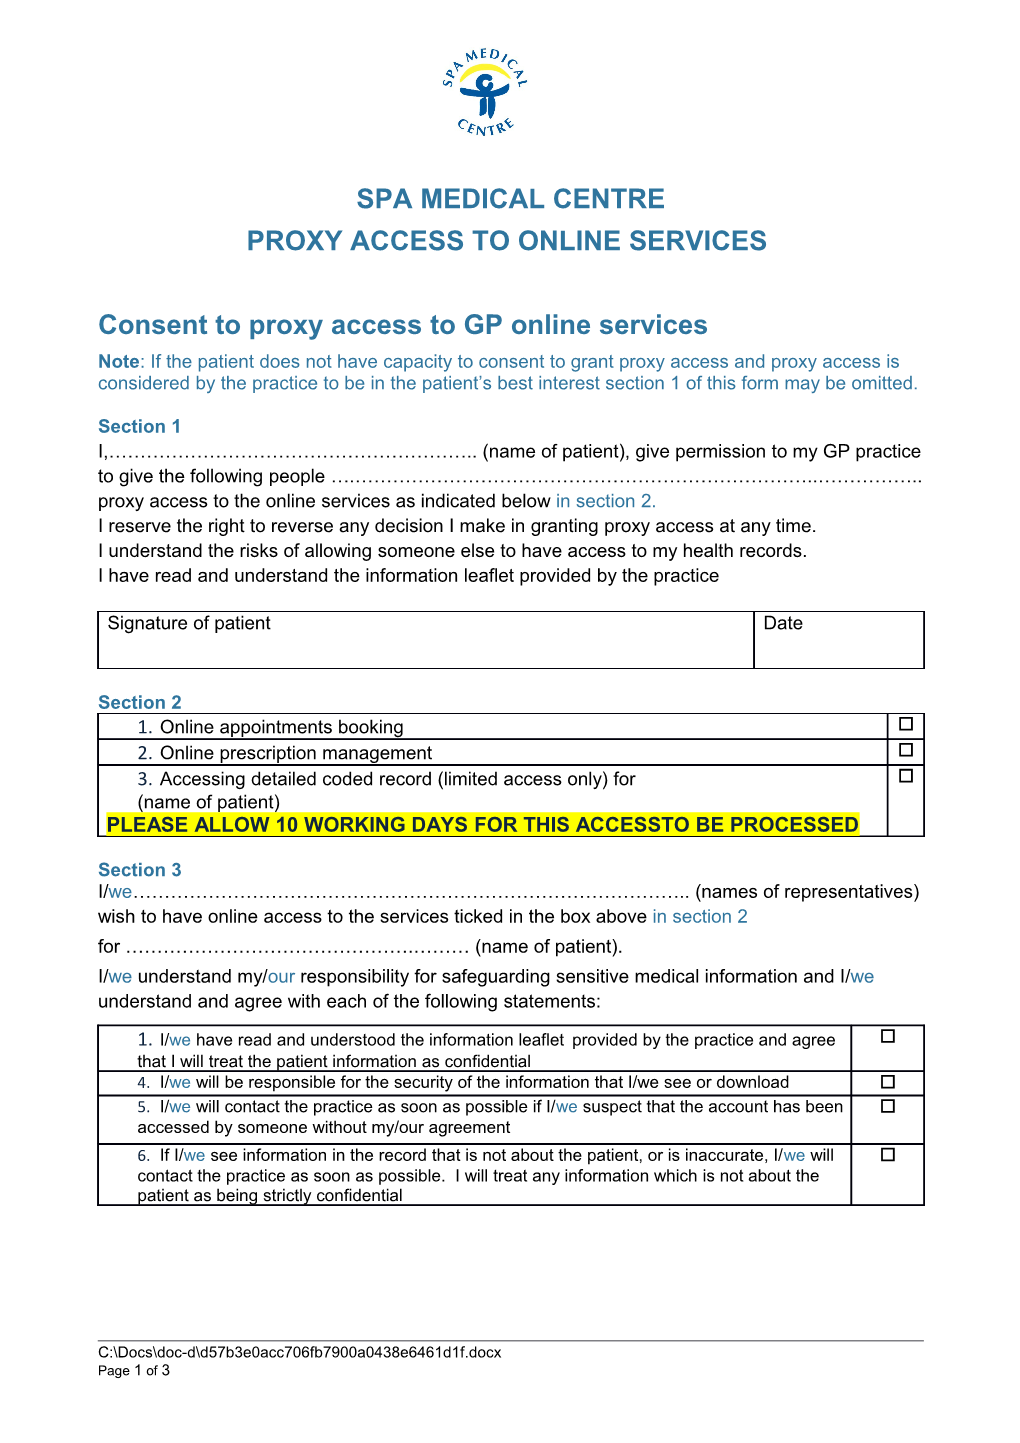 Proxy Access to Online Services